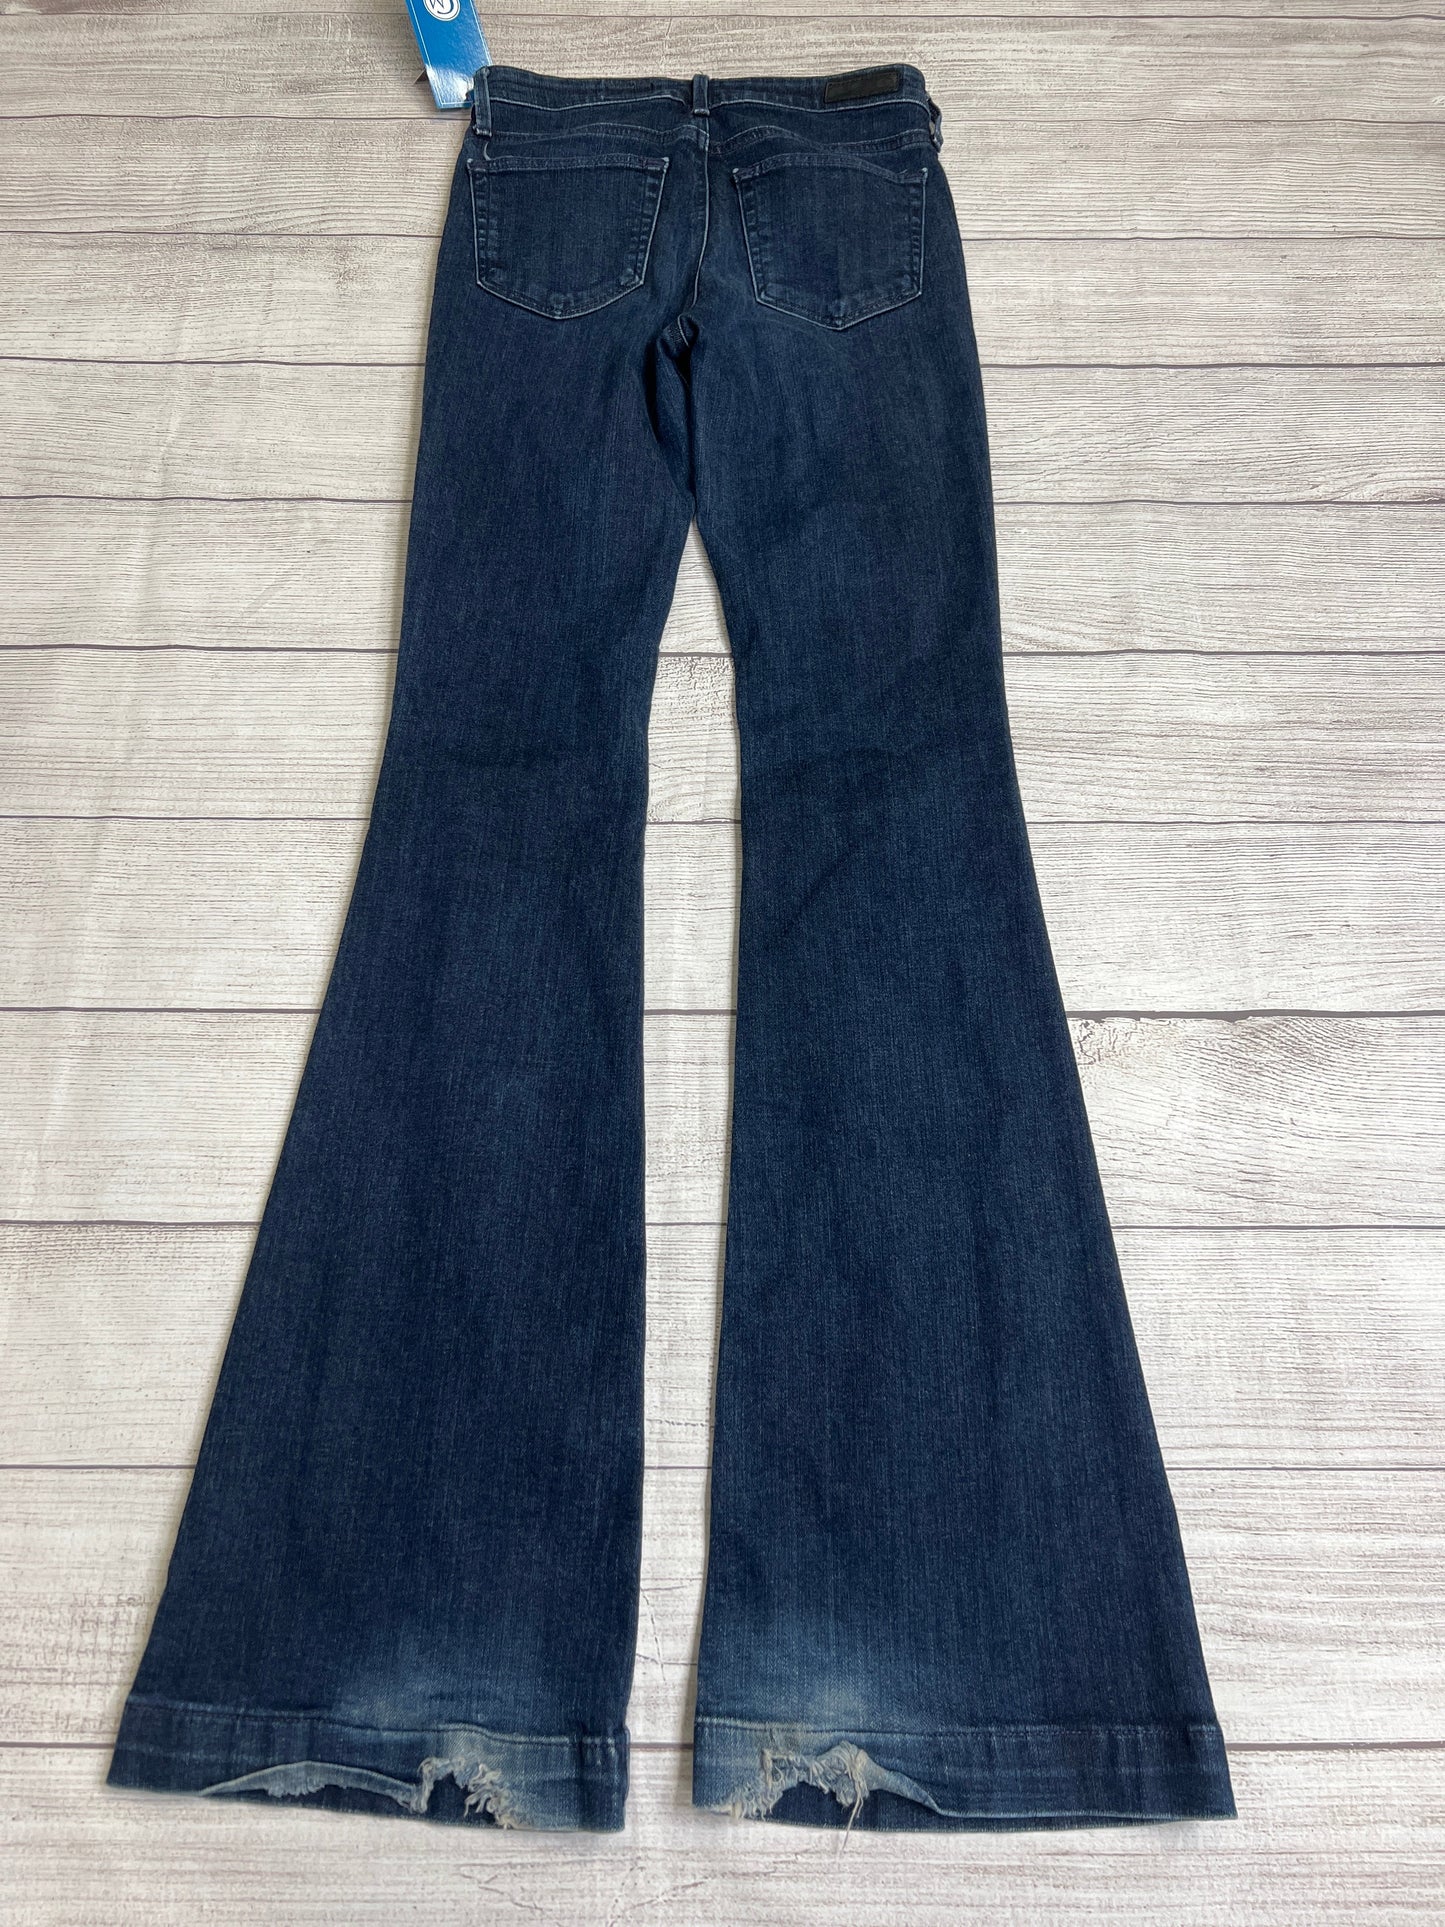 Jeans Designer By Adriano Goldschmied  Size: 0/25